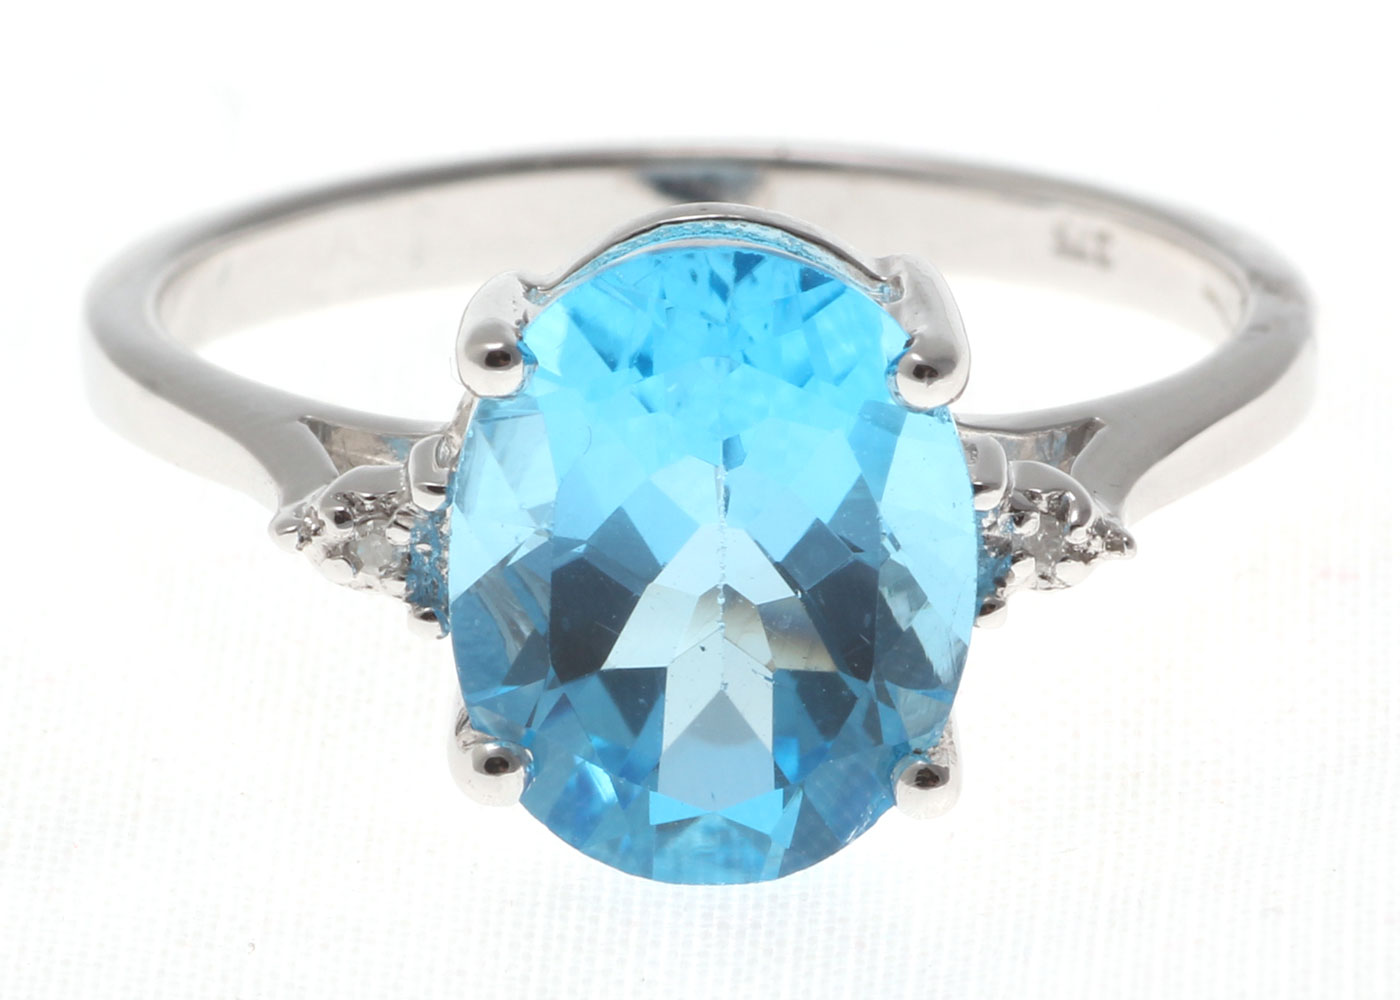 9ct White Gold Diamond And Blue Topaz Ring - Image 5 of 6